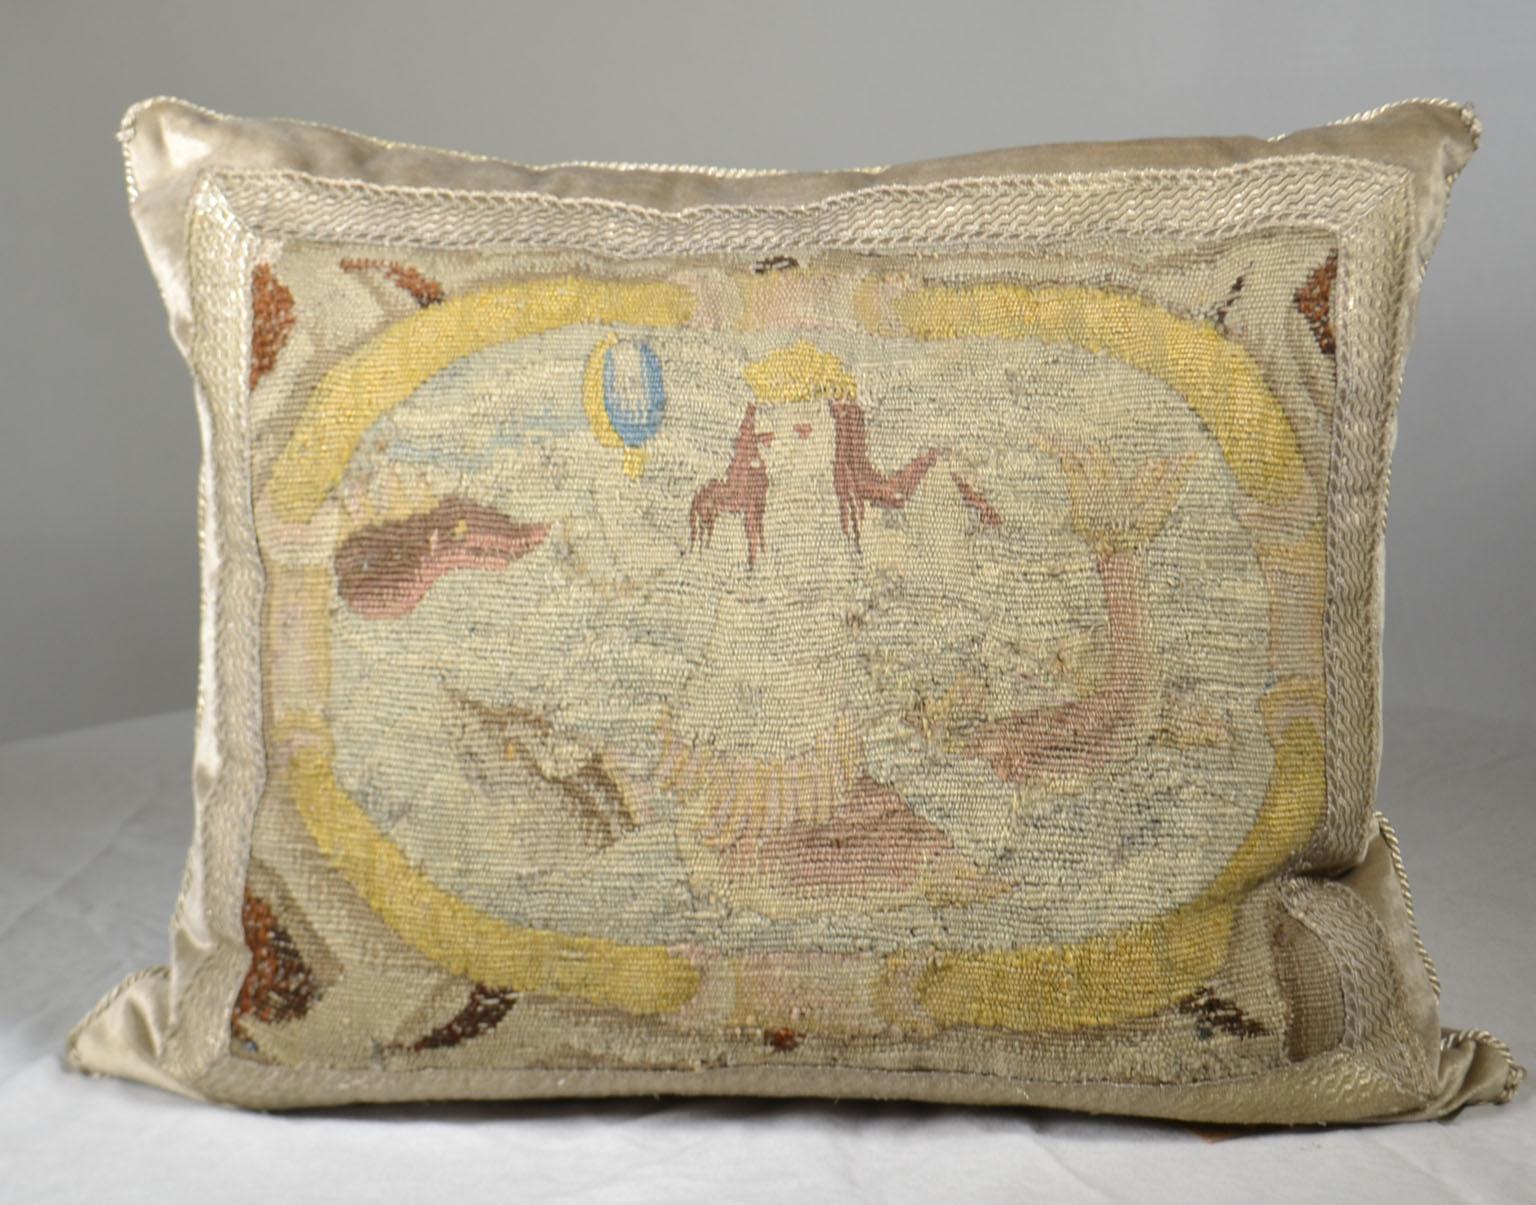 17th century tapestry fragment depicting a mermaid framed in a cartouche framed with antique silver metallic galon on pale warm taupe velvet. Hand trimmed with vintage metallic silver cording knotted in the corners. Down filled. Measures: 17 1/2